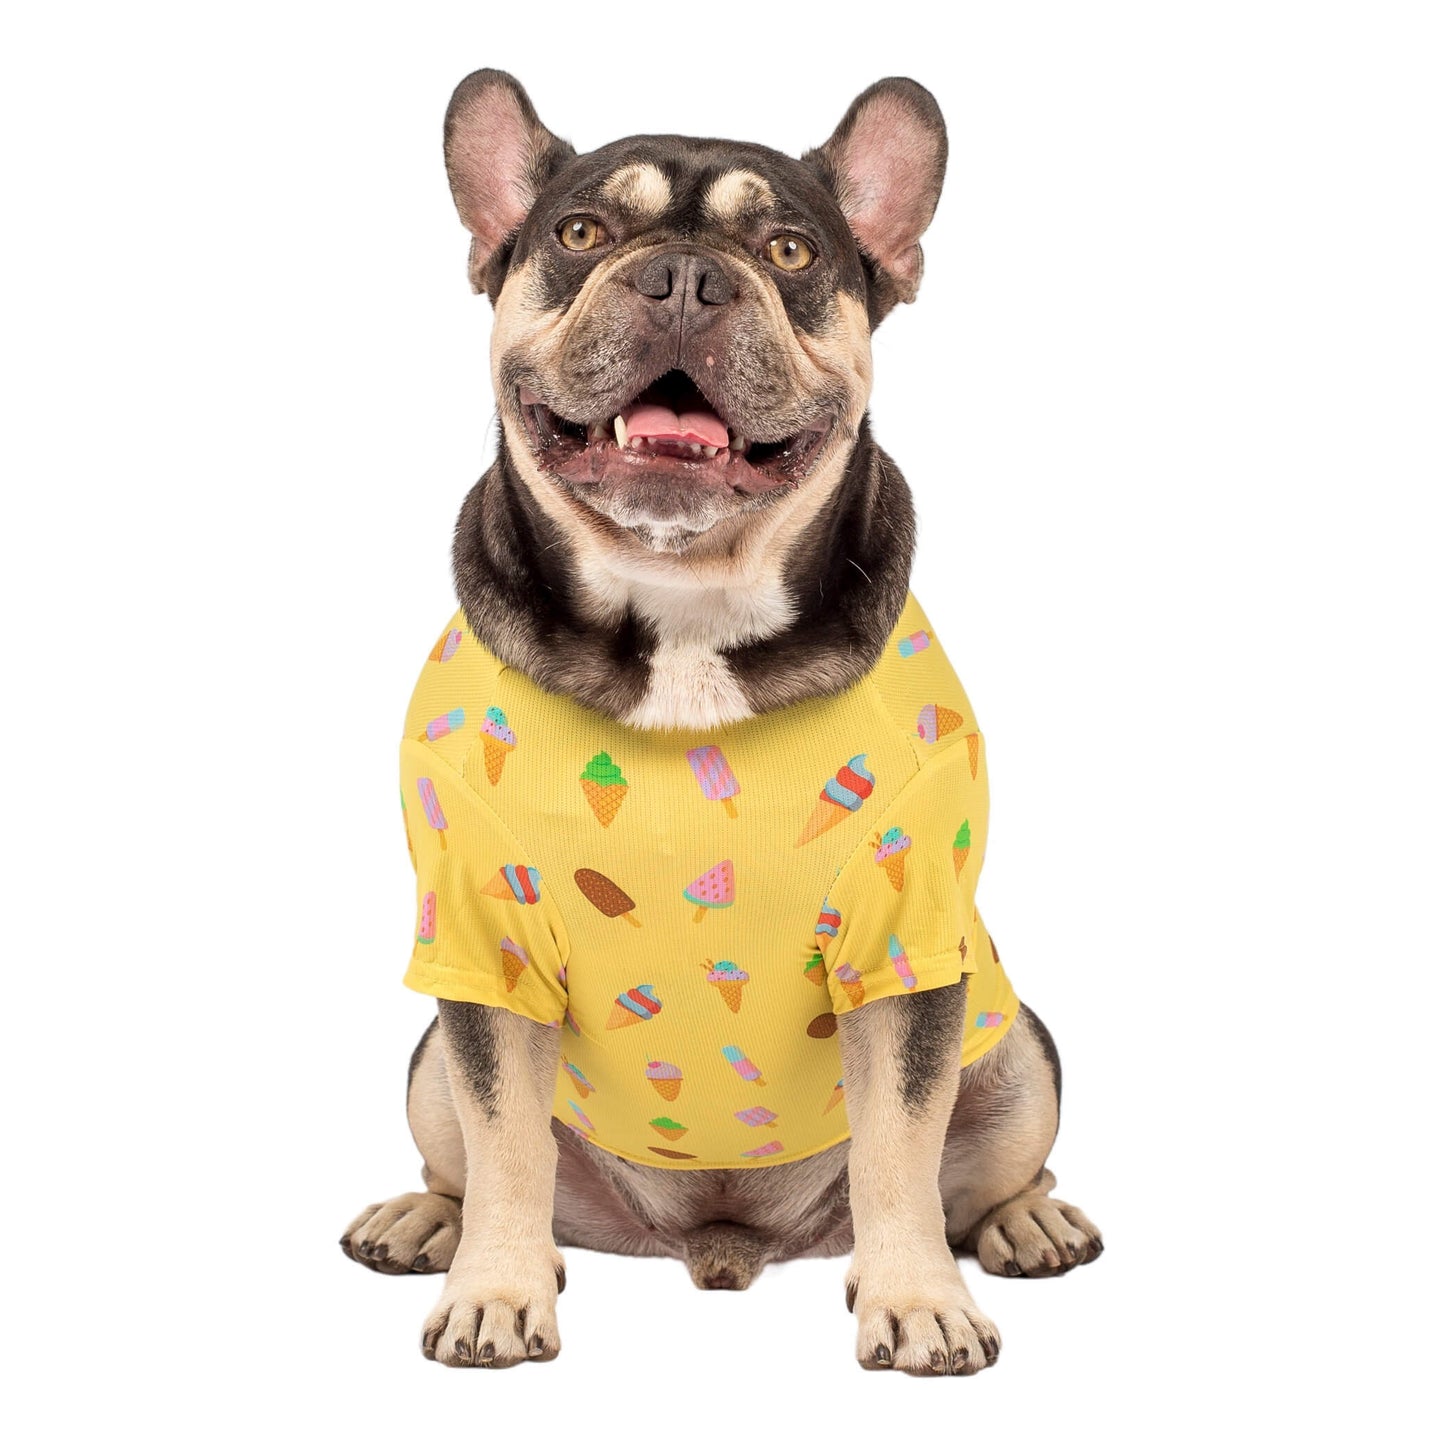 A French Bulldog sitting while Vibrant Hounds Ice-cream dream cooling shirt. The shirt is yellow with ice creams and ice blocks printed on it.